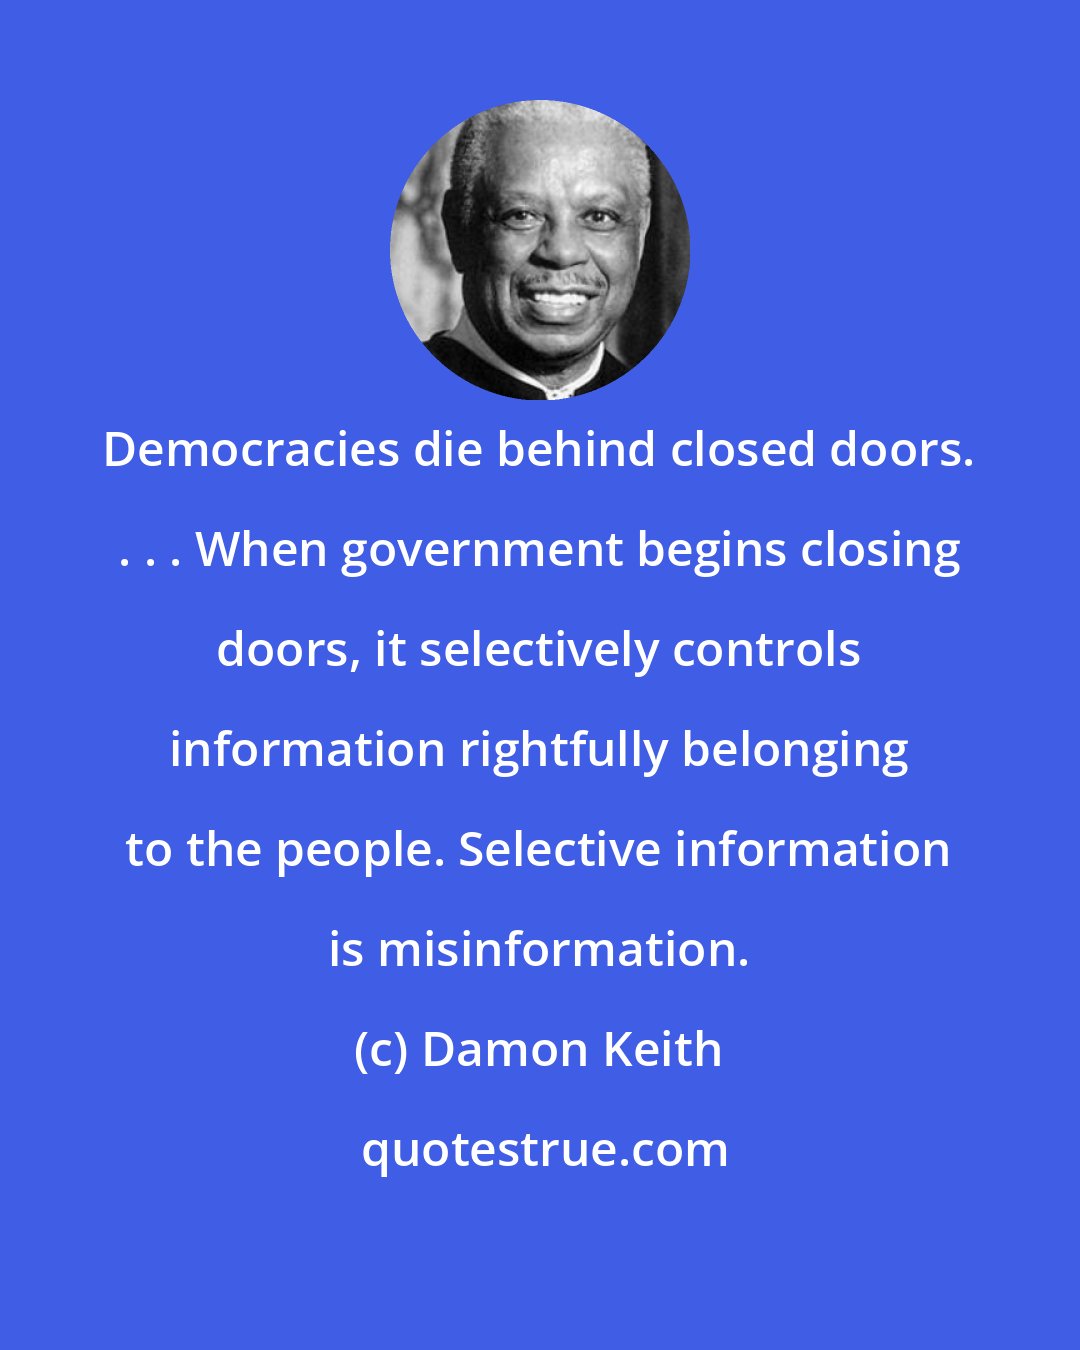 Damon Keith: Democracies die behind closed doors. . . . When government begins closing doors, it selectively controls information rightfully belonging to the people. Selective information is misinformation.